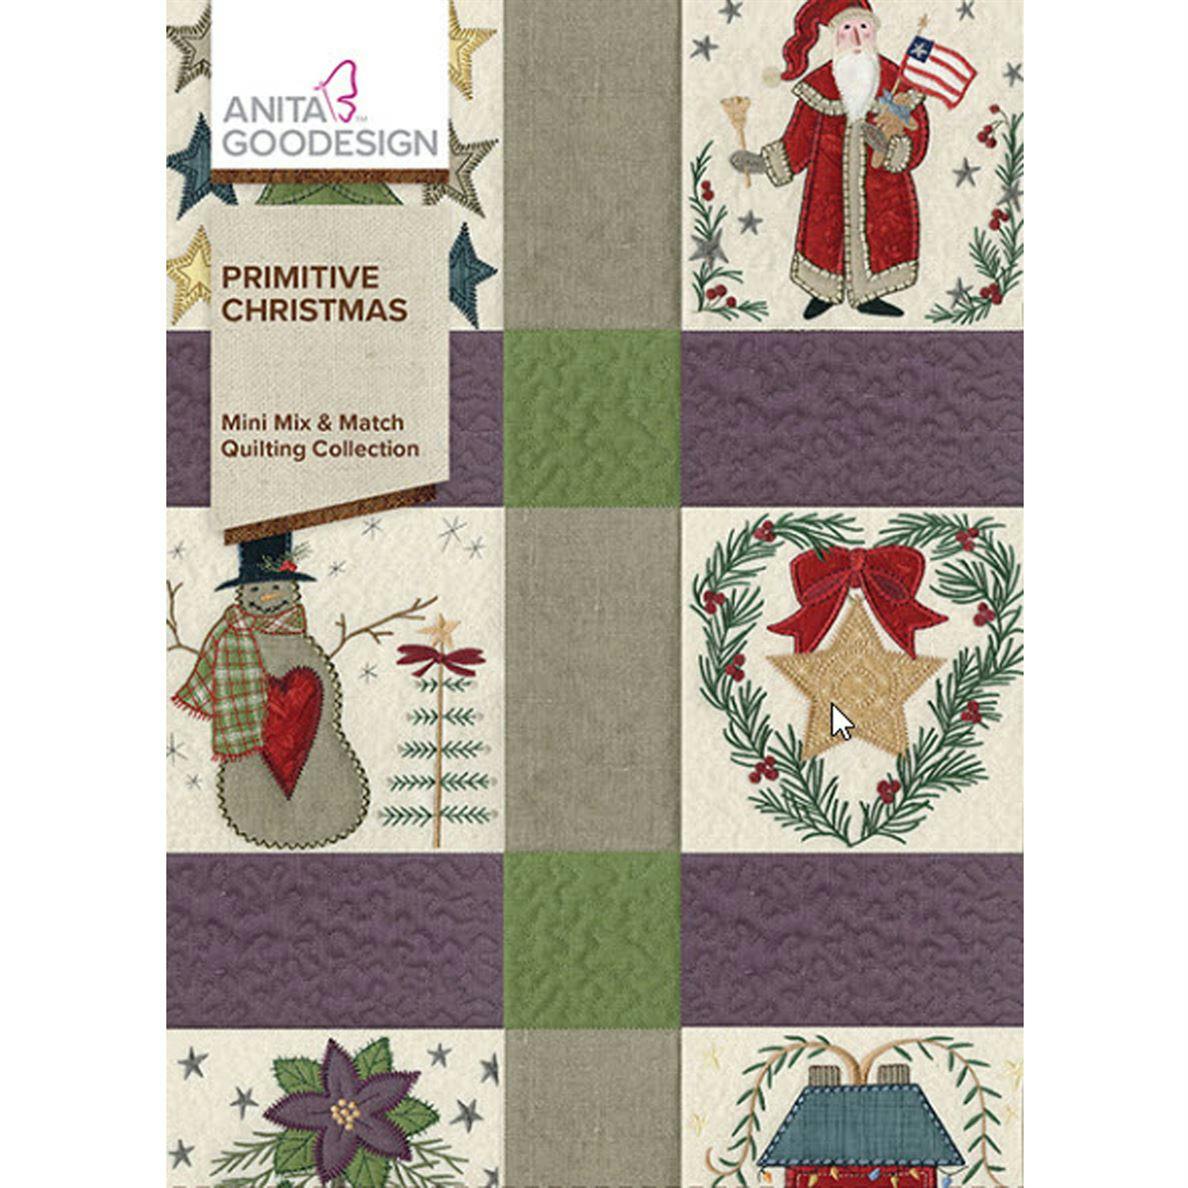 CD cover for Primitive Christmas design collection